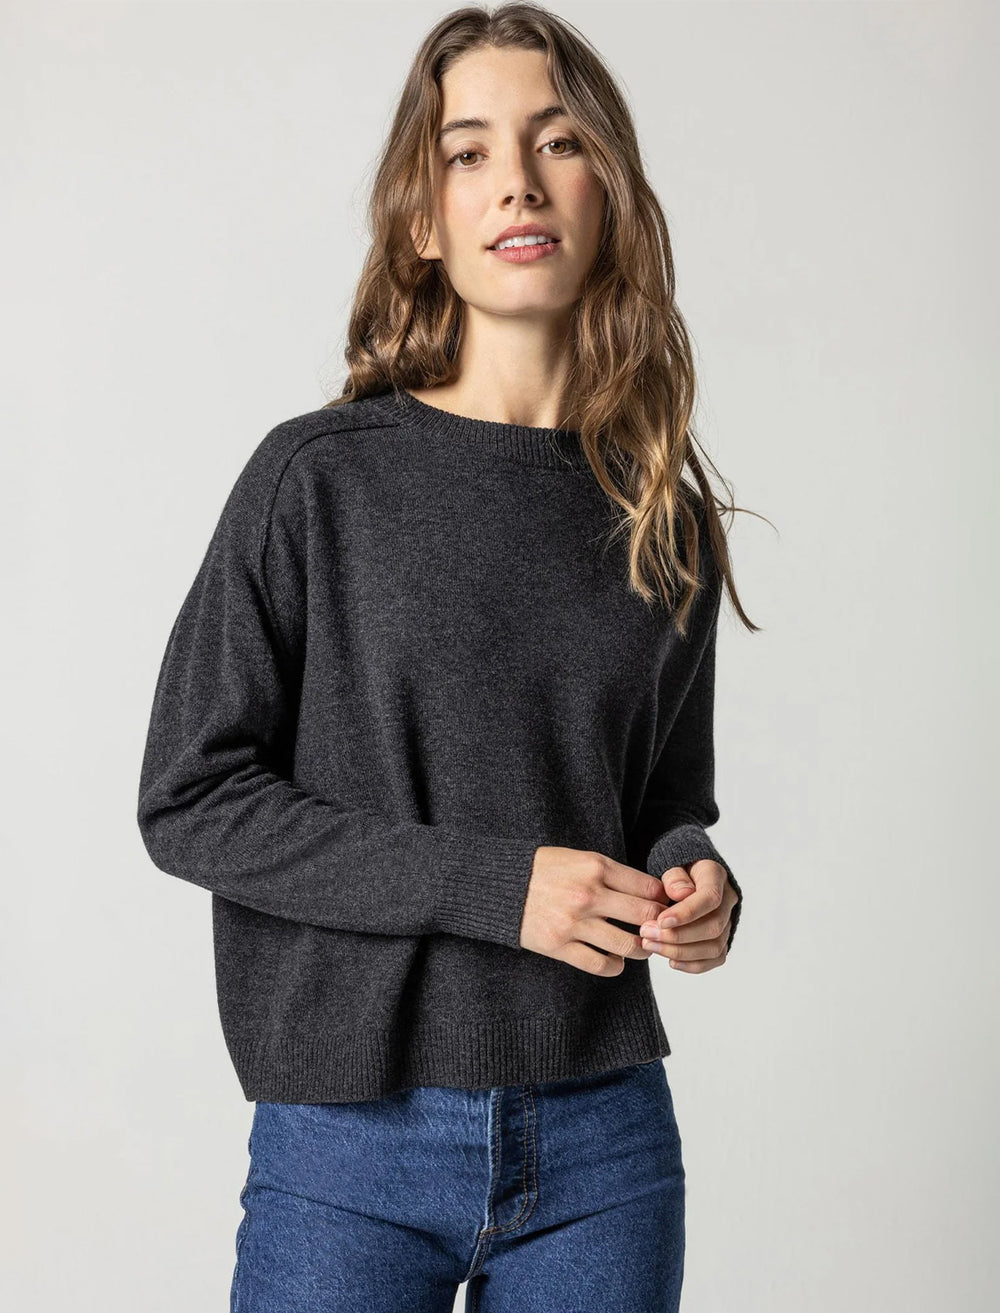 Model wearing Lilla P.'s oversized saddle sleeve sweater in graphite.